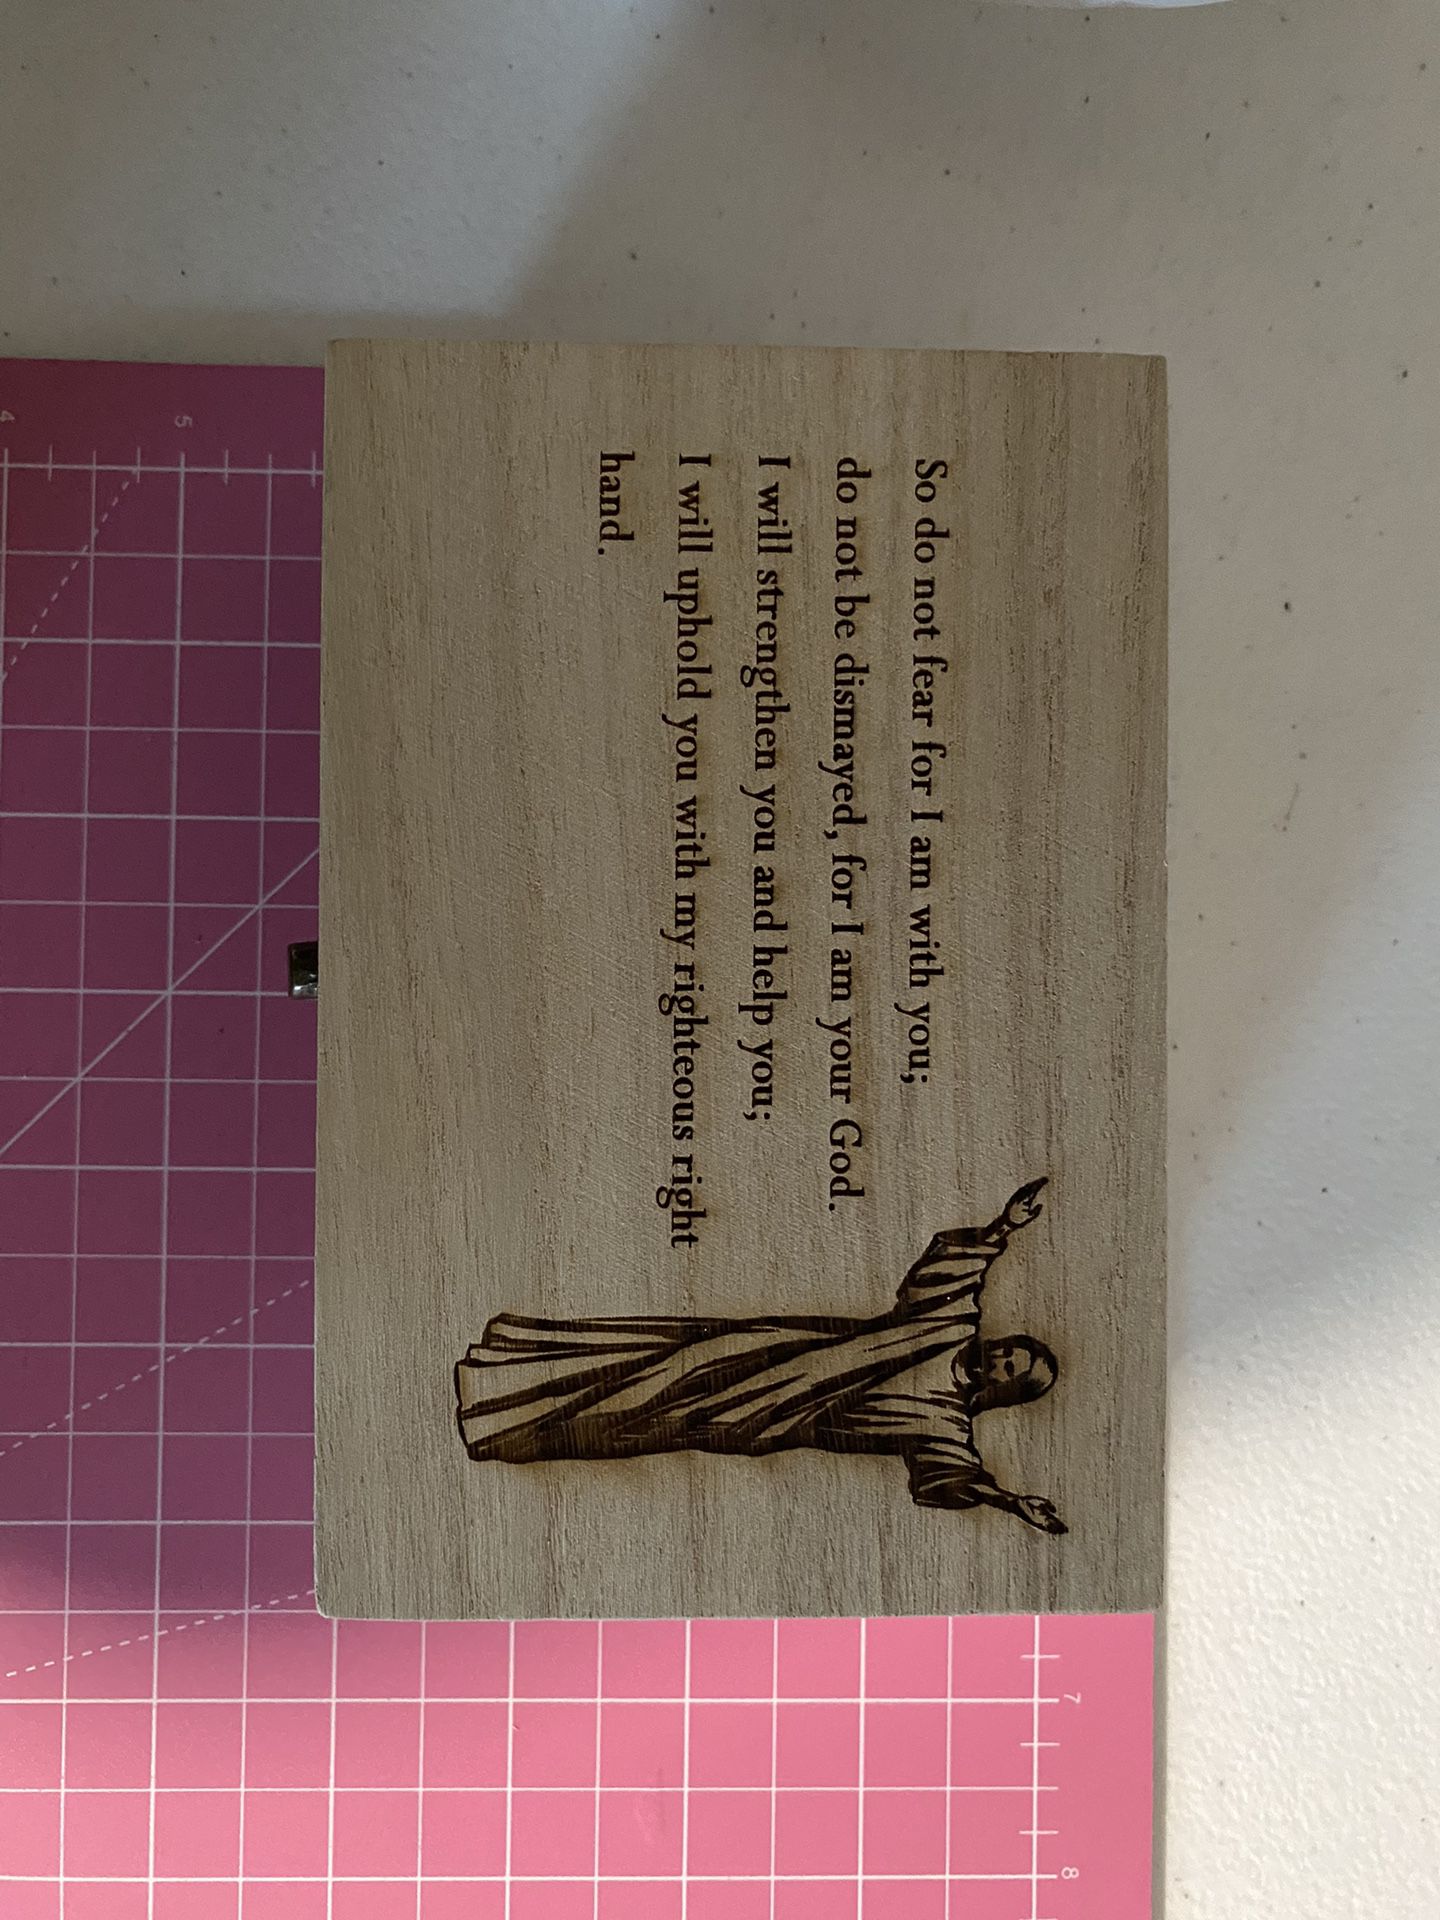 Christian / Catholic About 5 in by 3 in gift box- wood burned